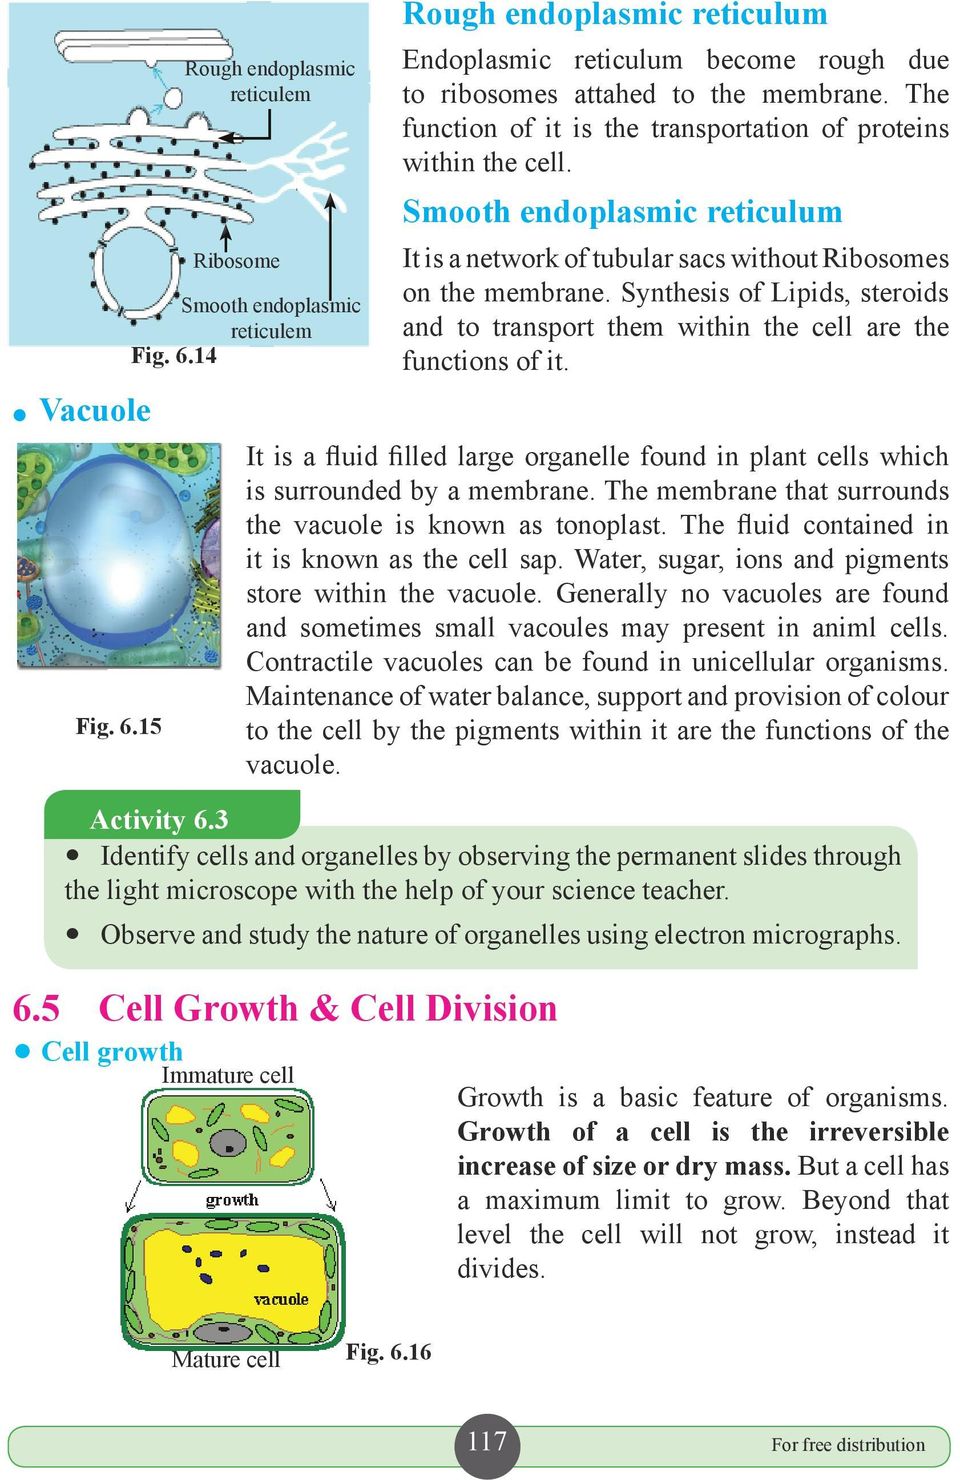 Synthesis of Lipids, steroids and to transport them within the cell are the functions of it. It is a fluid filled large organelle found in plant cells which is surrounded by a membrane.